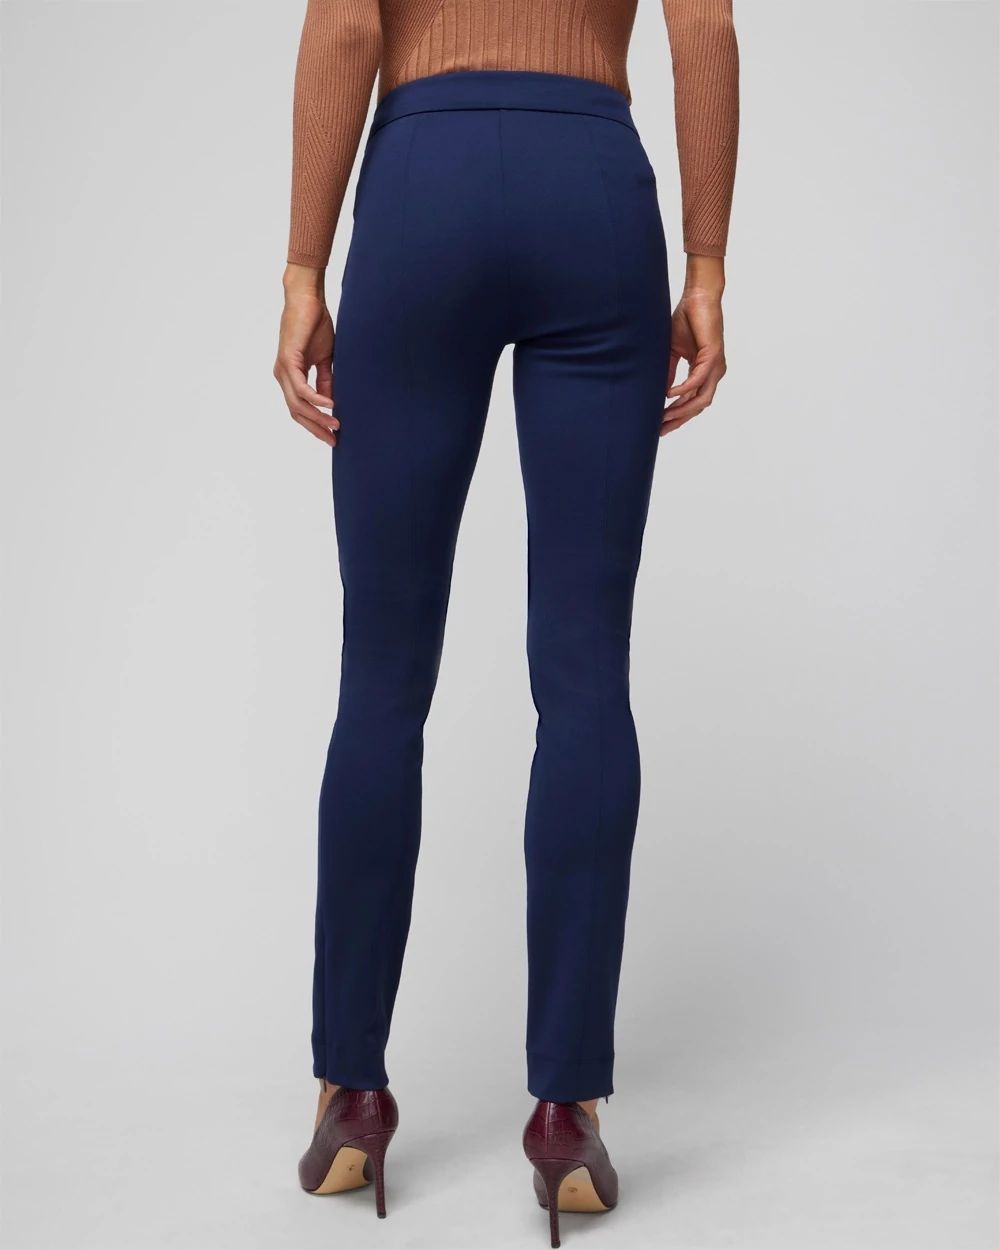 Petite Luxe Stretch Skinny Pant